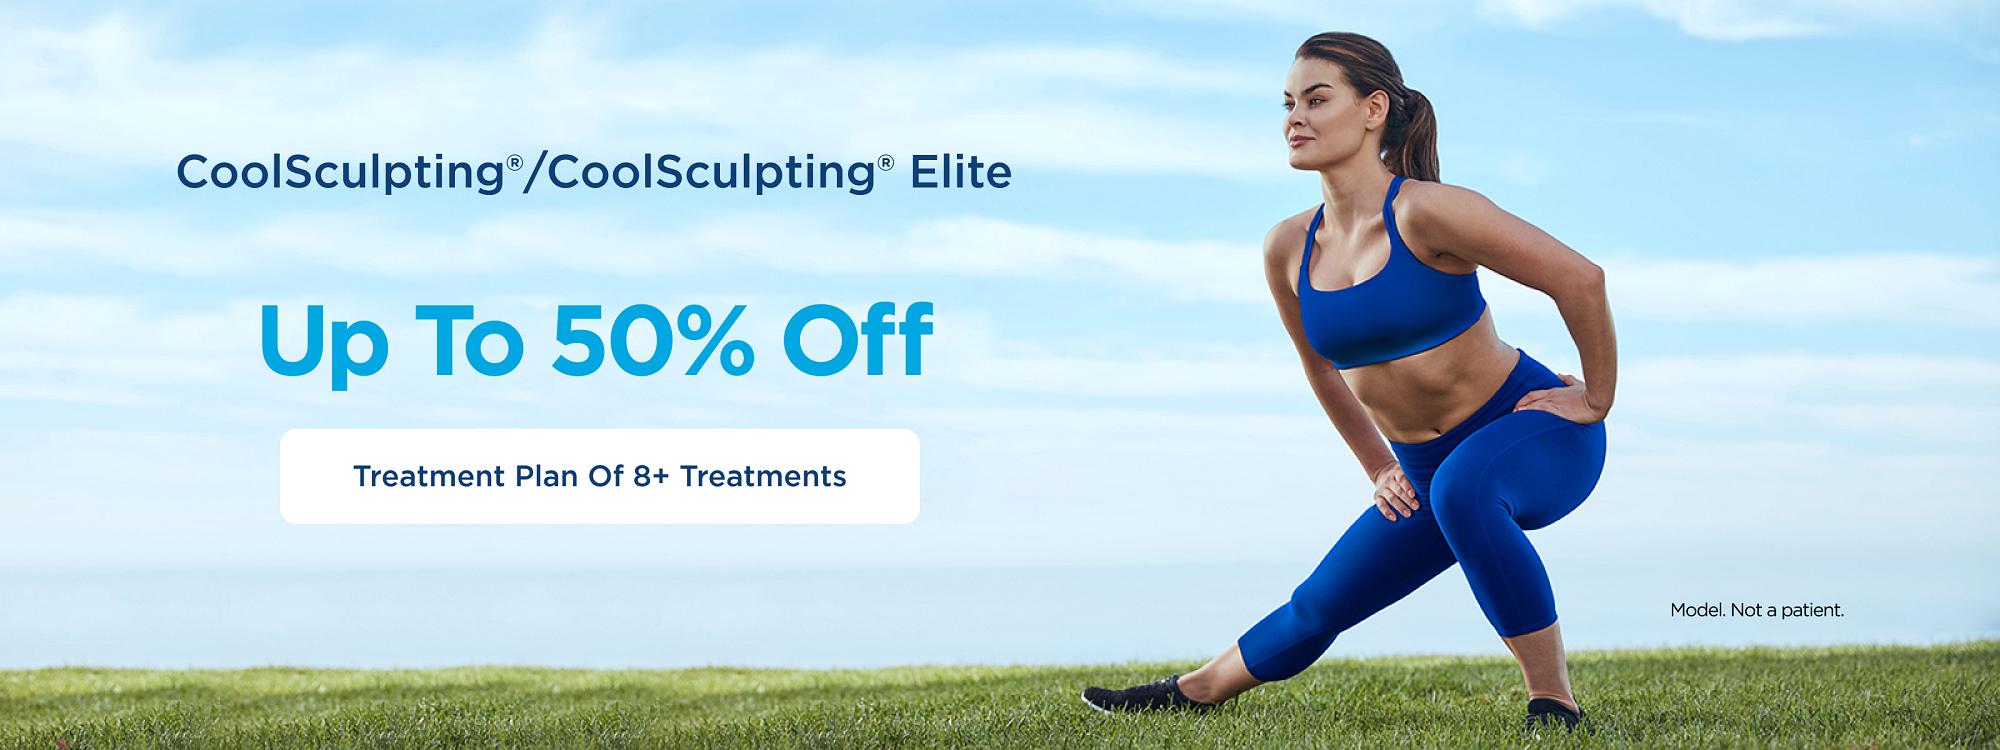 Exclusive Special. Enjoy the BEST PRICING for CoolSculpting with up to 50% off CoolSculpting®/CoolSculpting® Elite treatment plan of 8+ treatments for a limited time only.  Call today (781) 285-3535